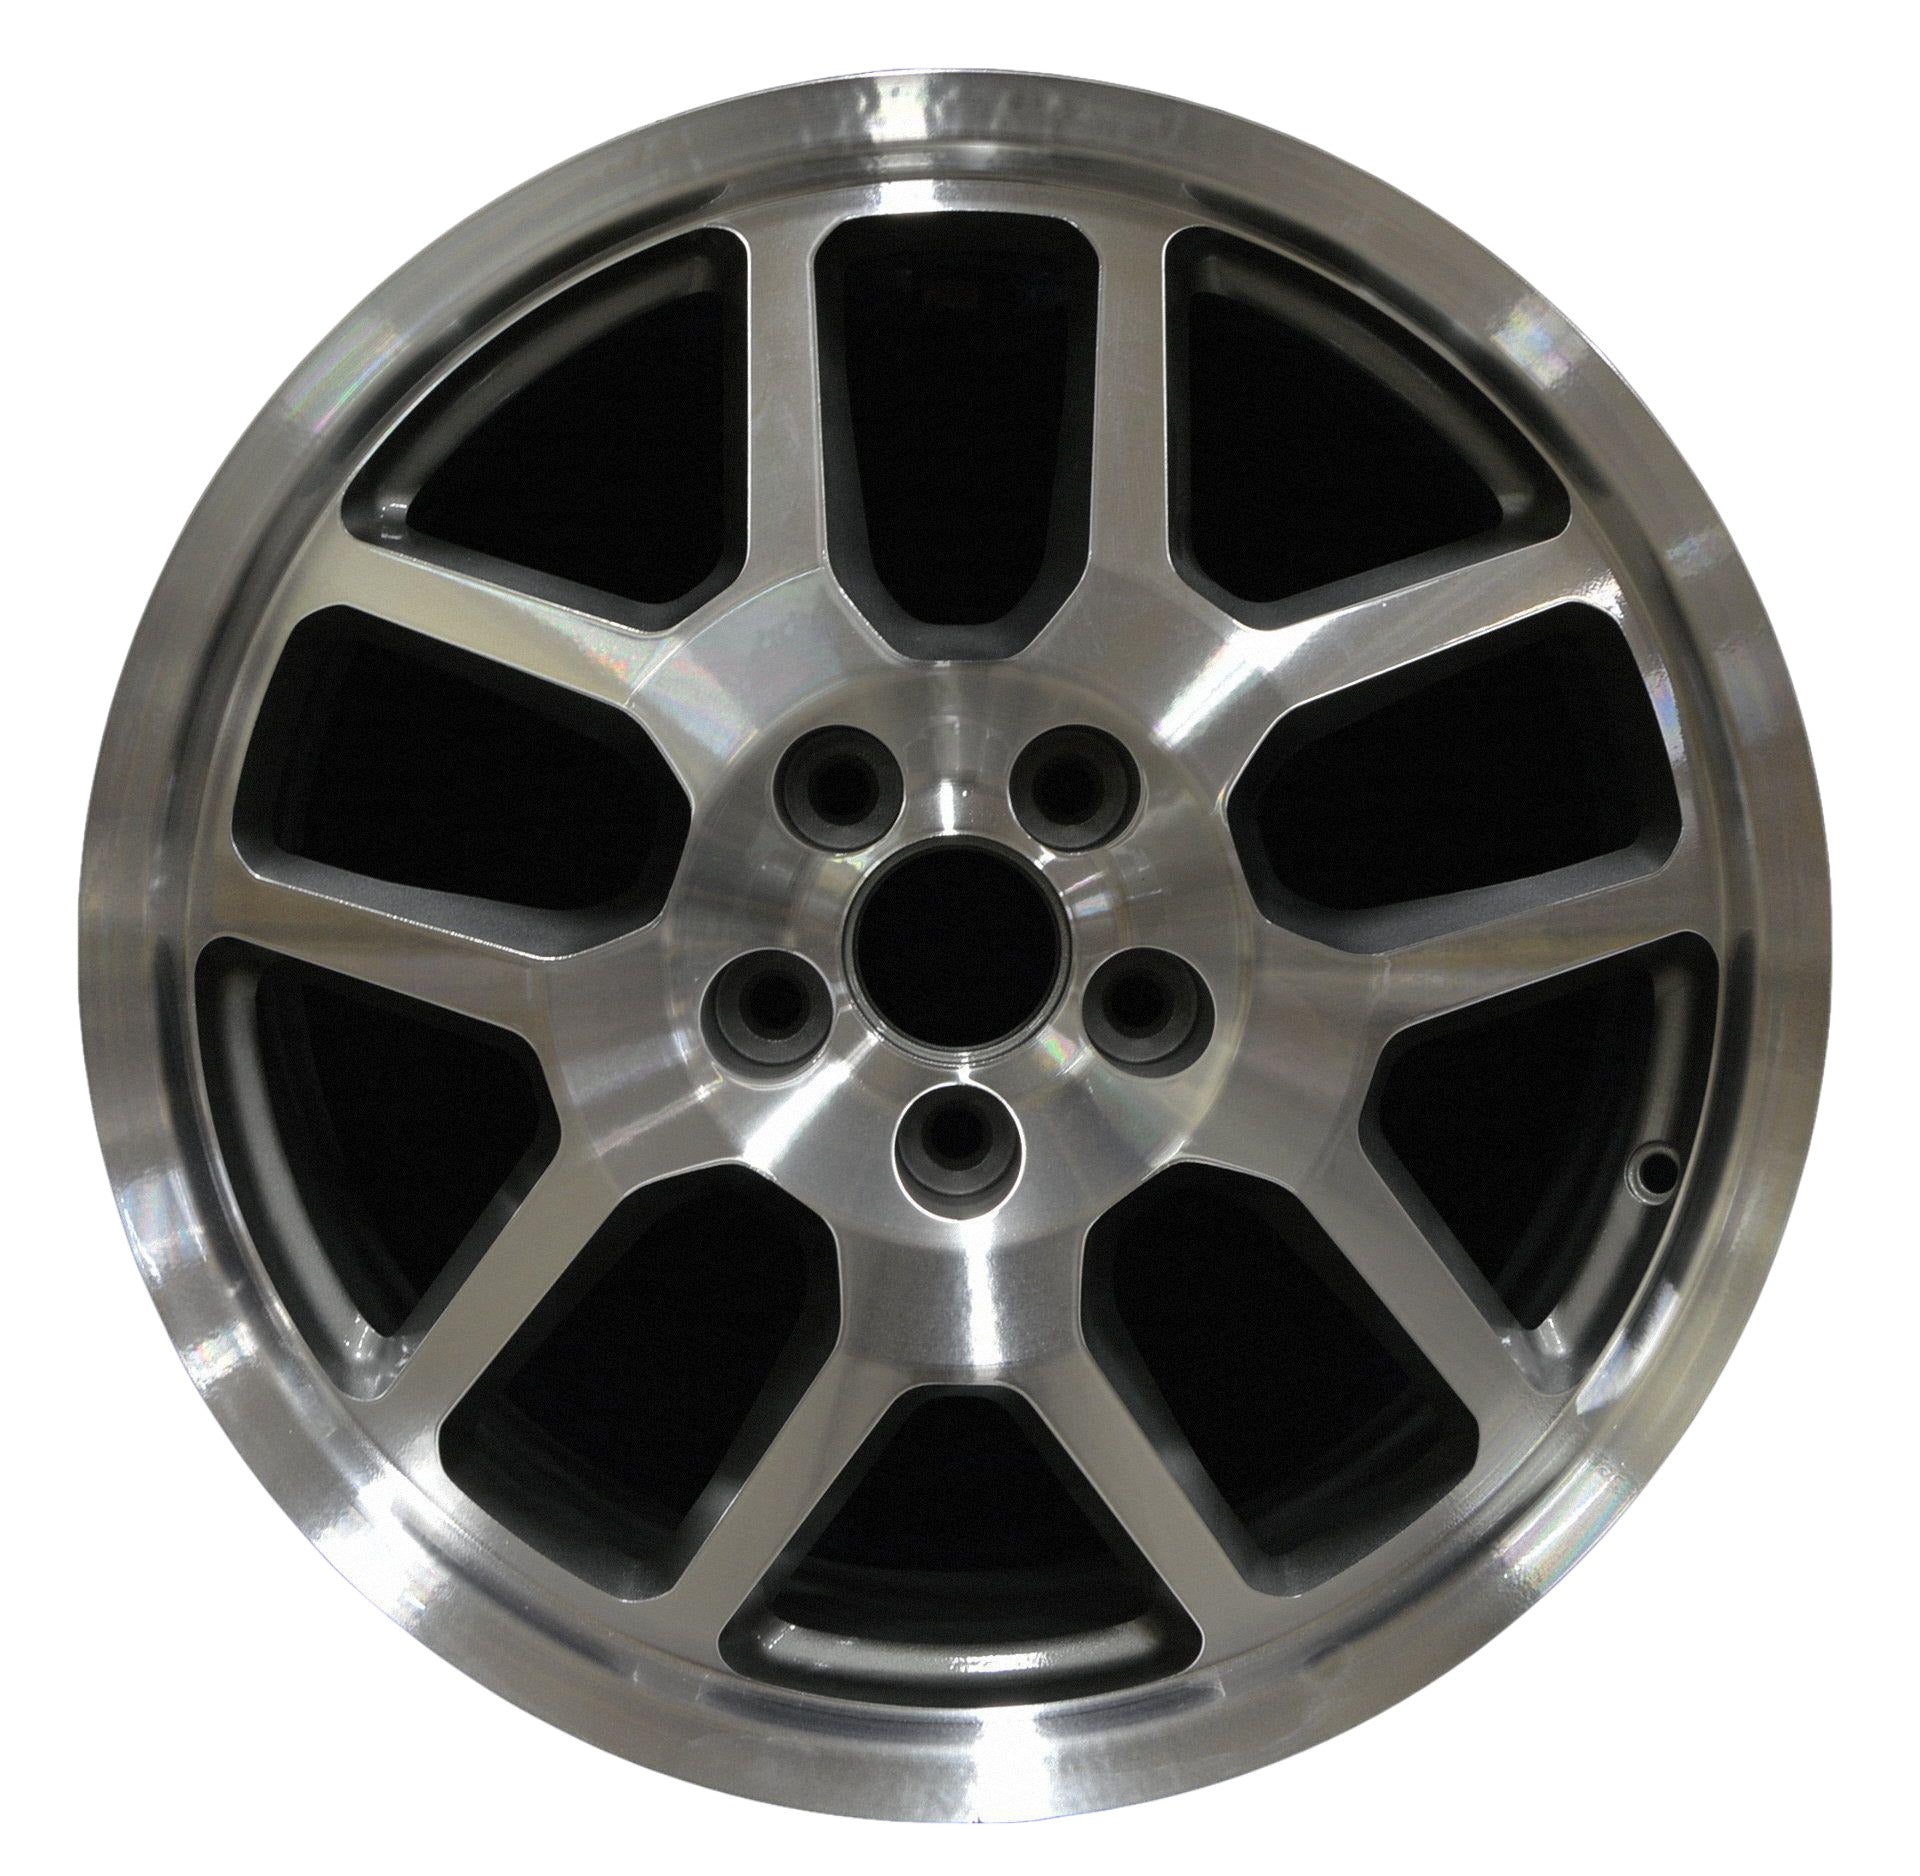 Ford Mustang  2007, 2008, 2009 Factory OEM Car Wheel Size 18x9.5 Alloy WAO.3668.LC25.MA